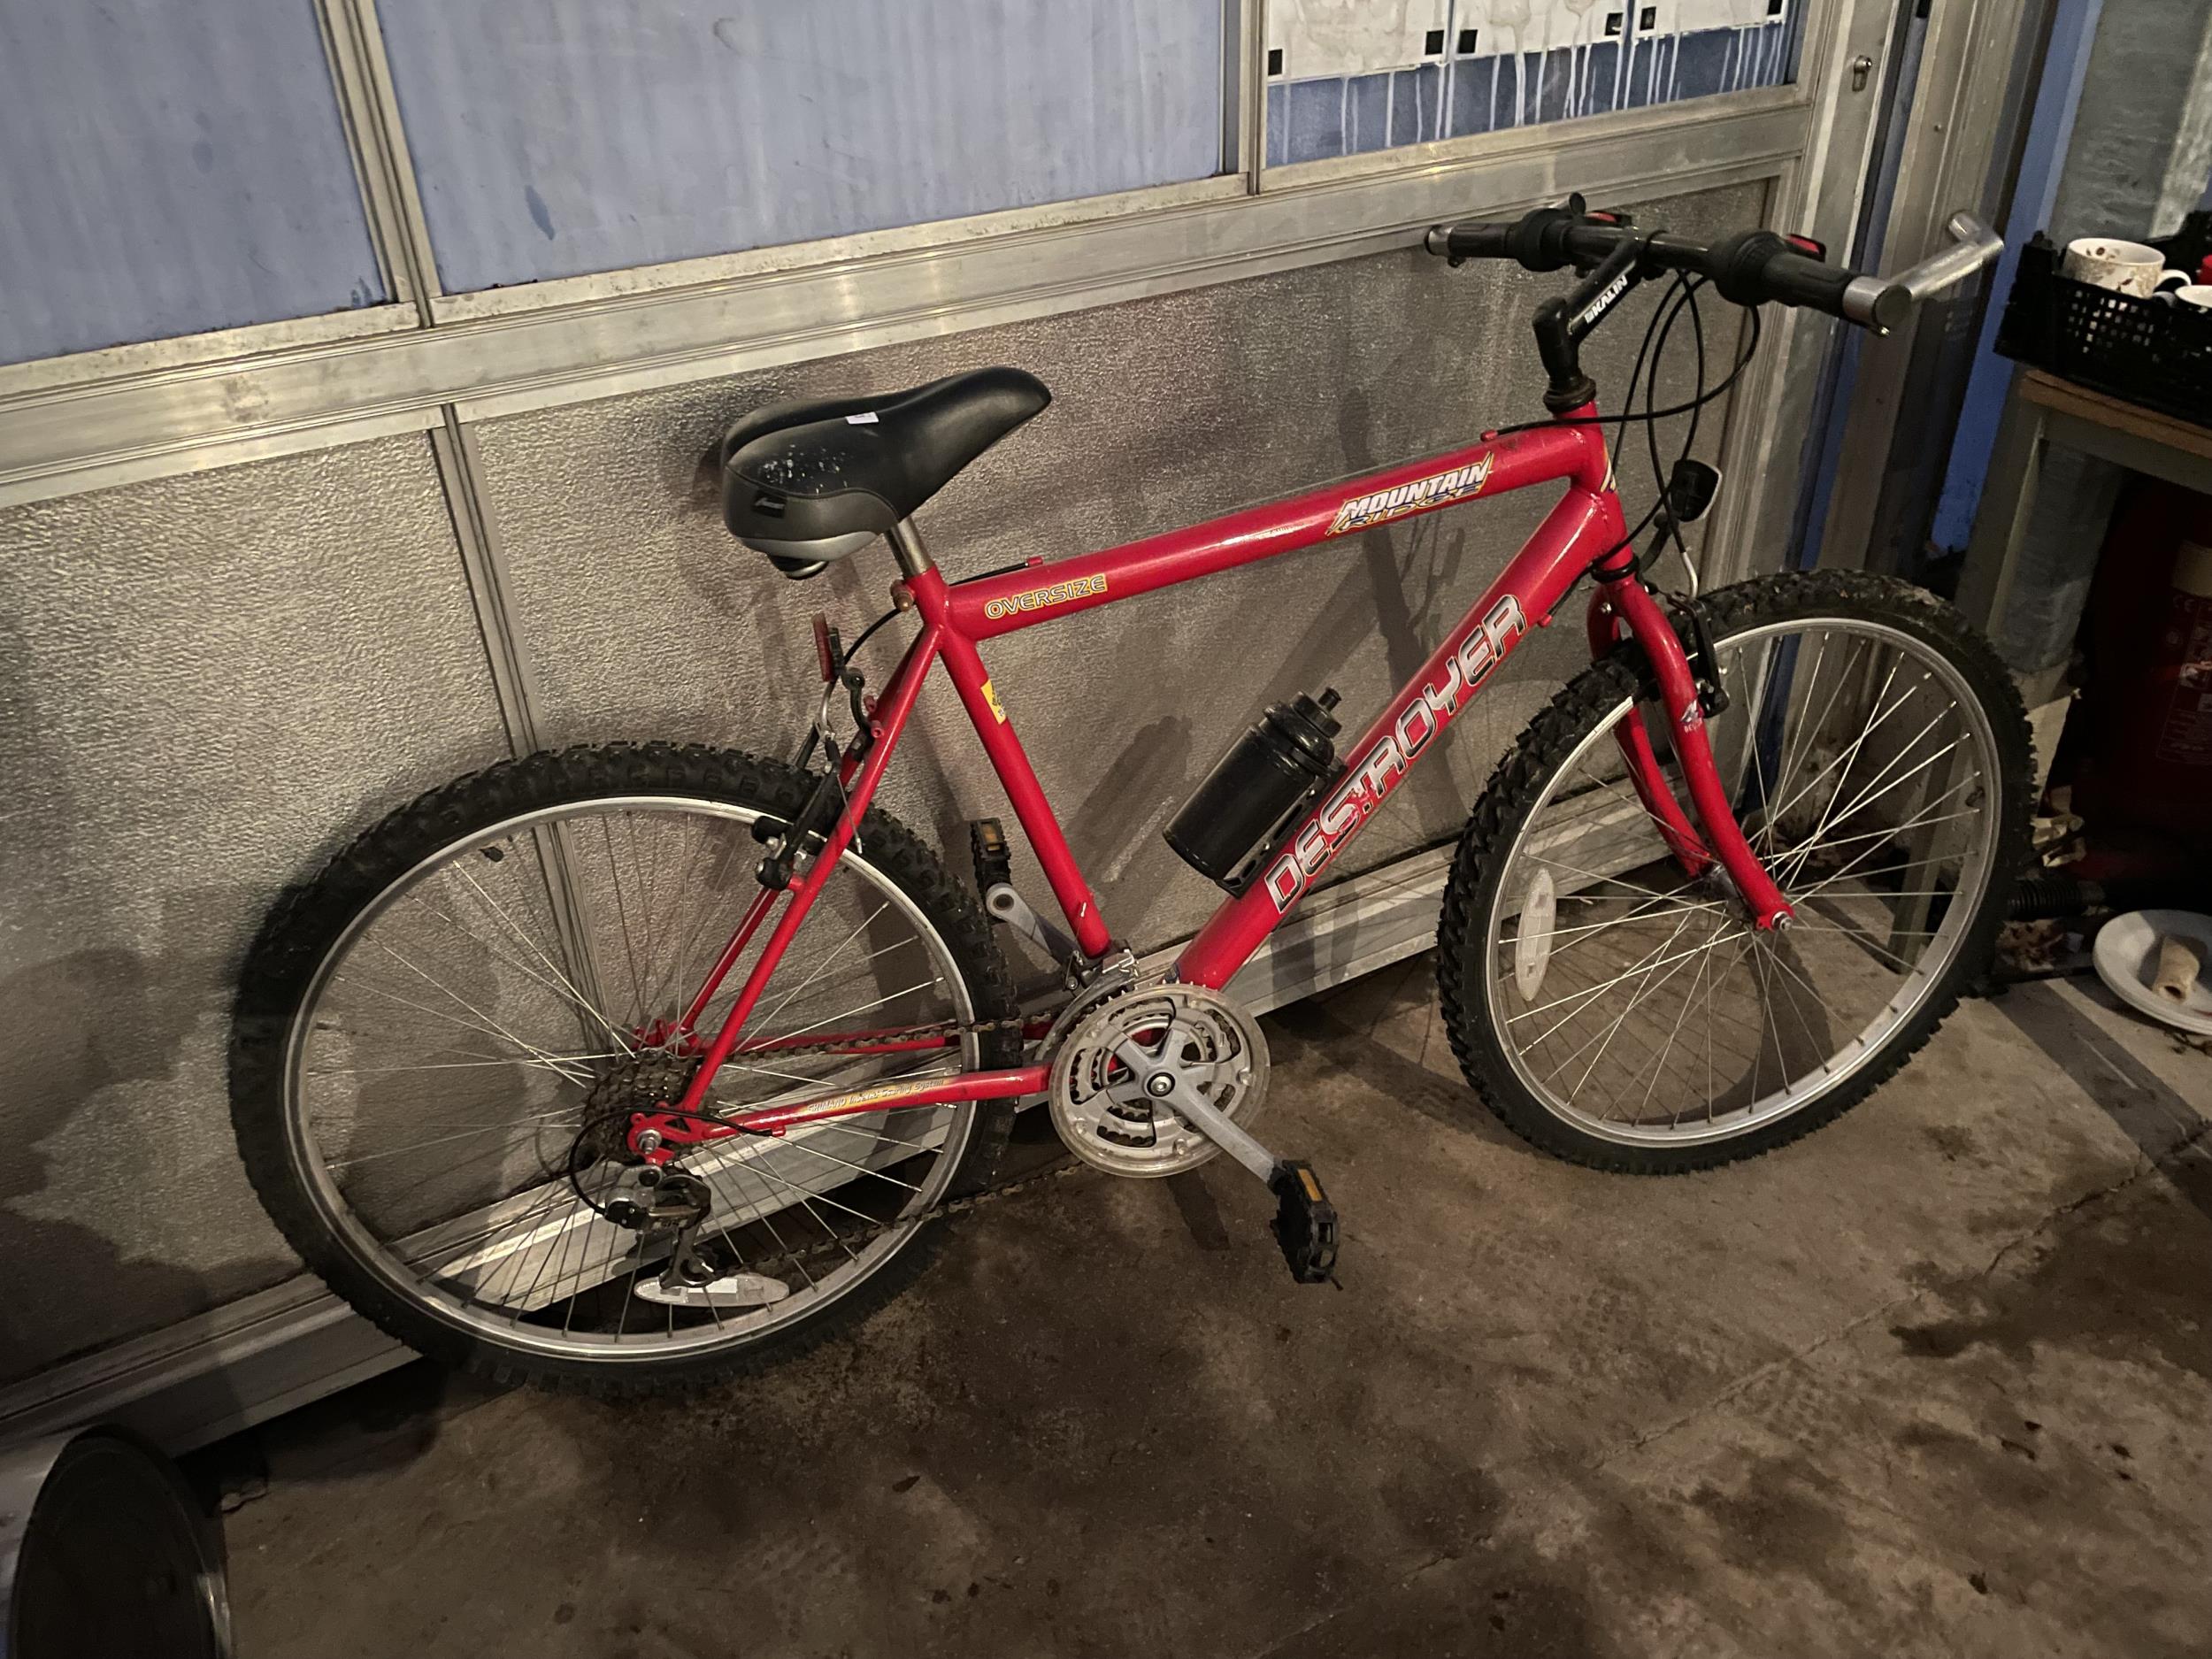 A RED DESTROYER MOUNTAIN BIKE WITH 18 SPEED GEAR SYSTEM